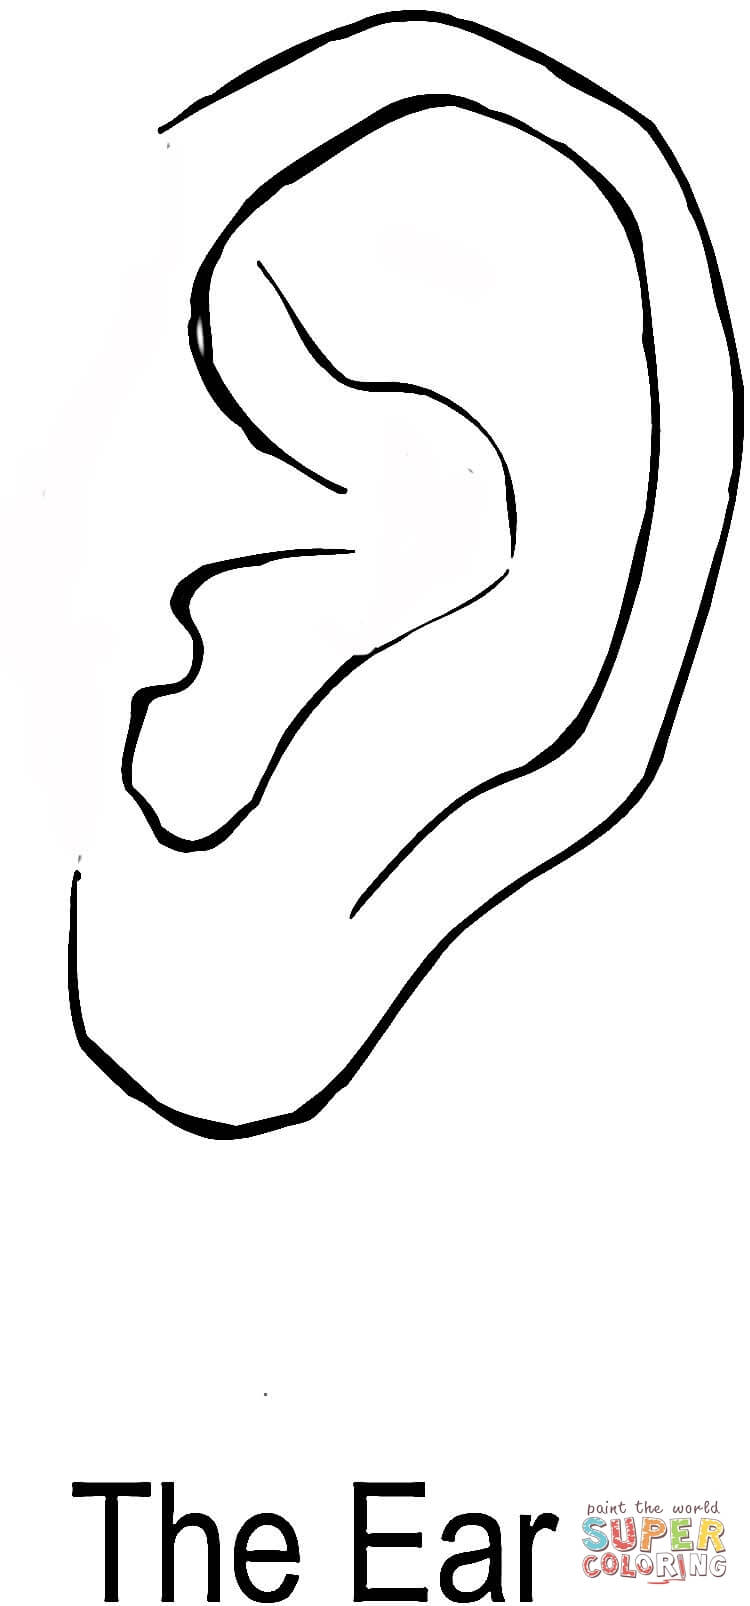 The ear coloring page free printable coloring pages